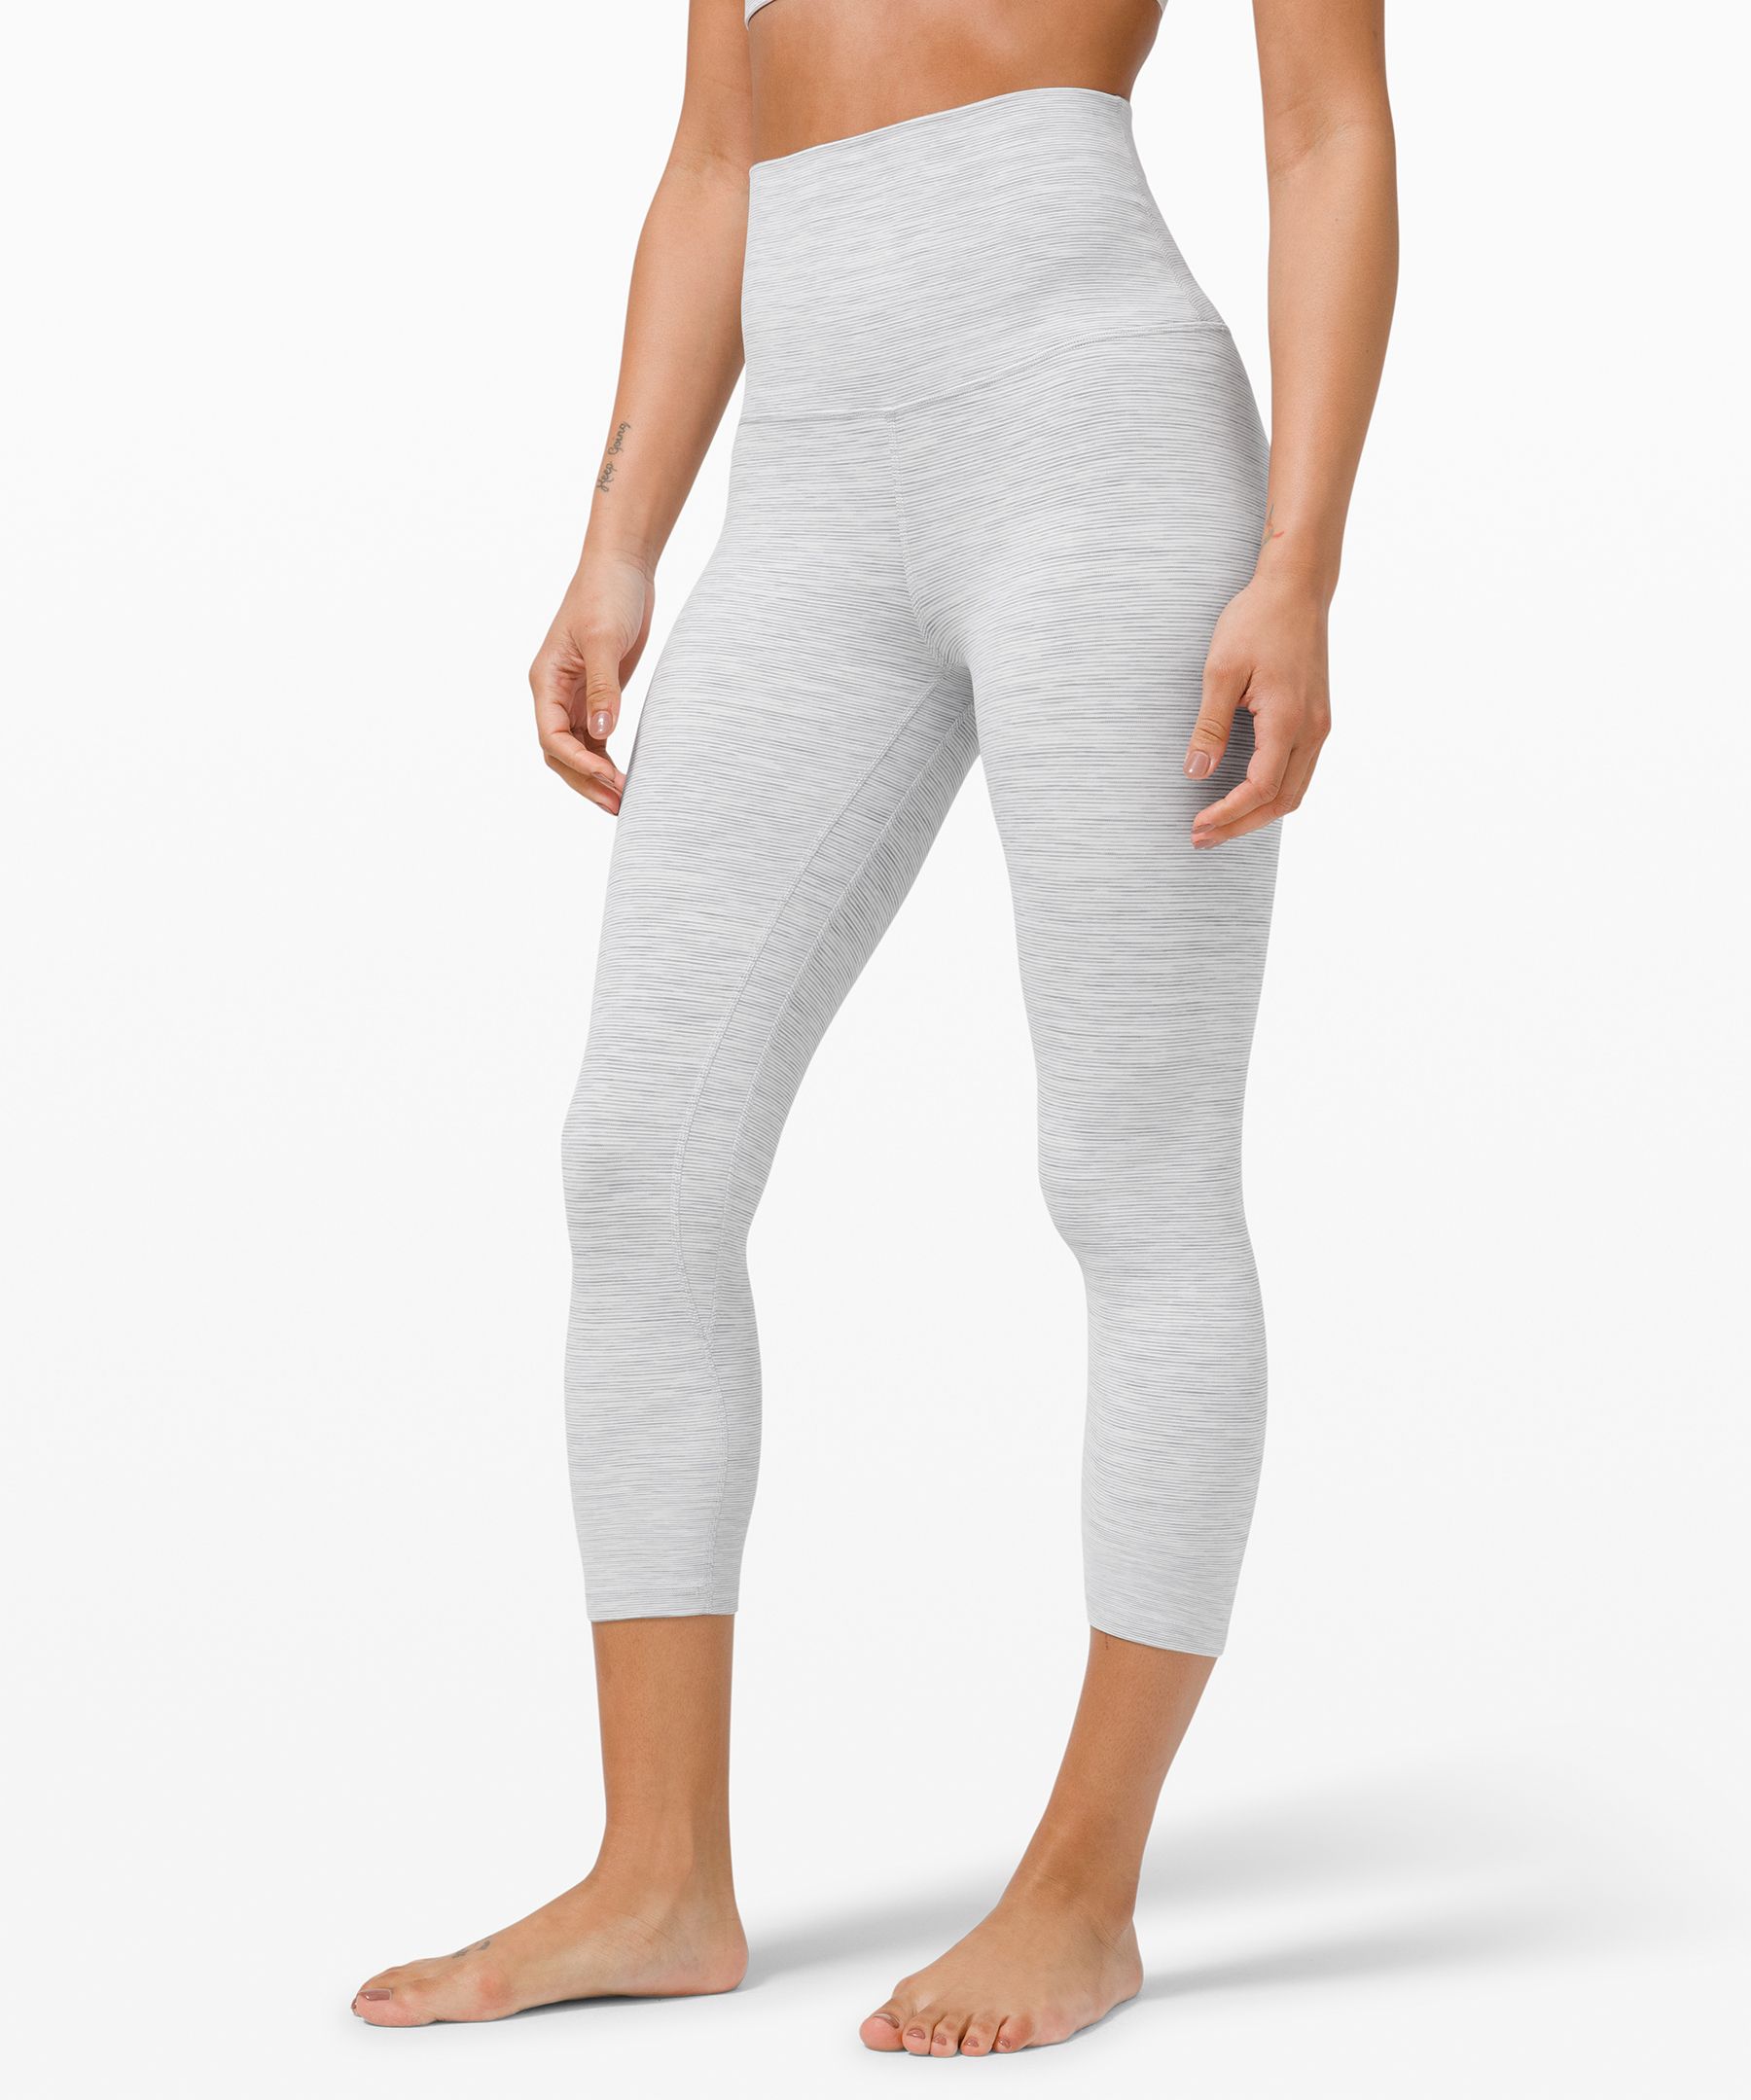 Lululemon Align™ Super High-rise Crop 21 *online Only In White